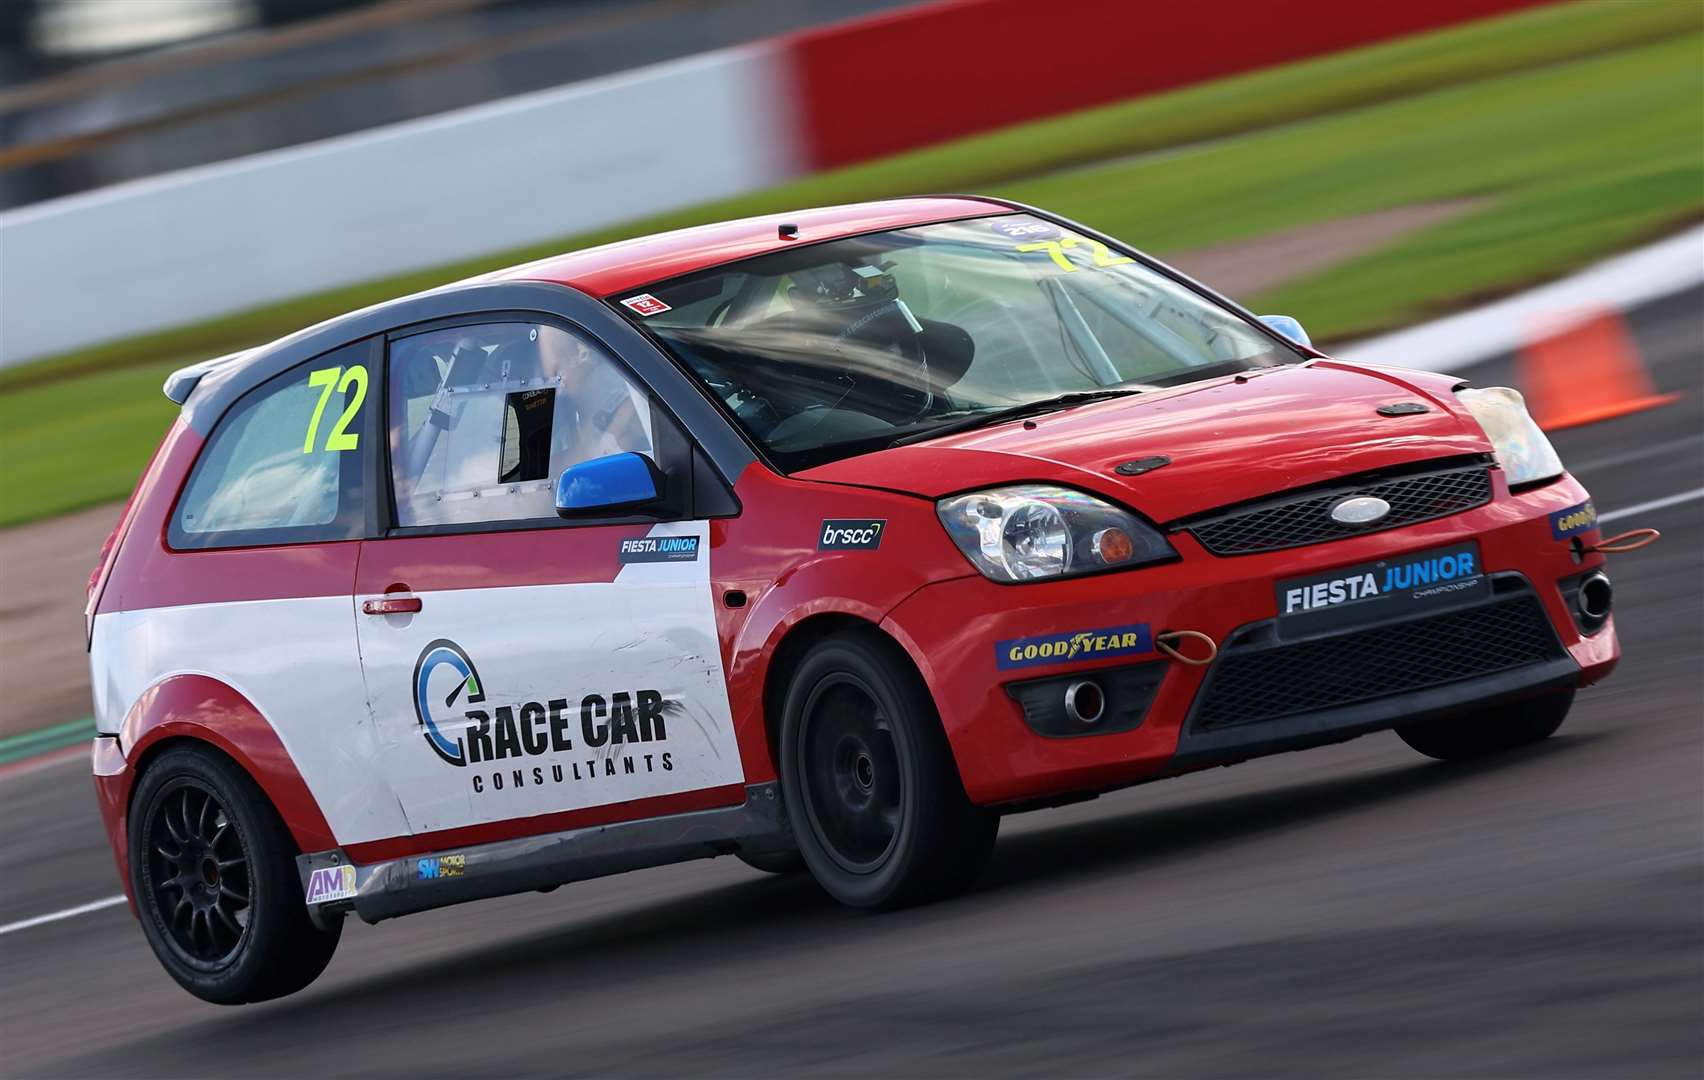 Thomas Merritt says it’s a dream come true to be racing in the Fiesta Junior Championship.